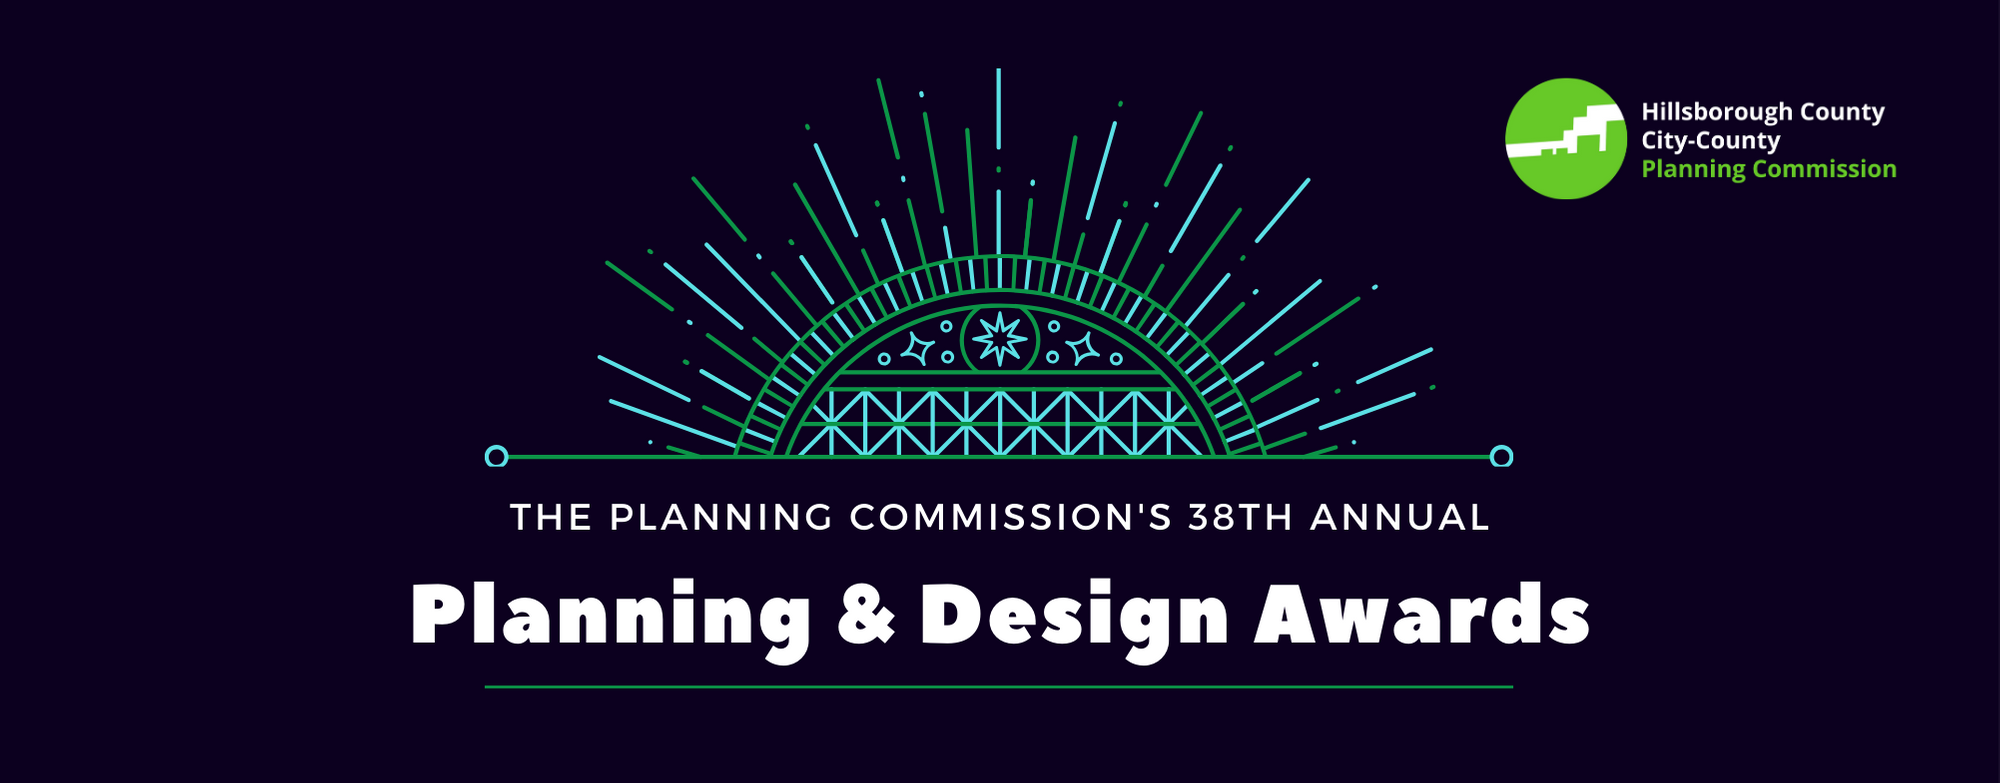 38th Planning and Design Awards Header